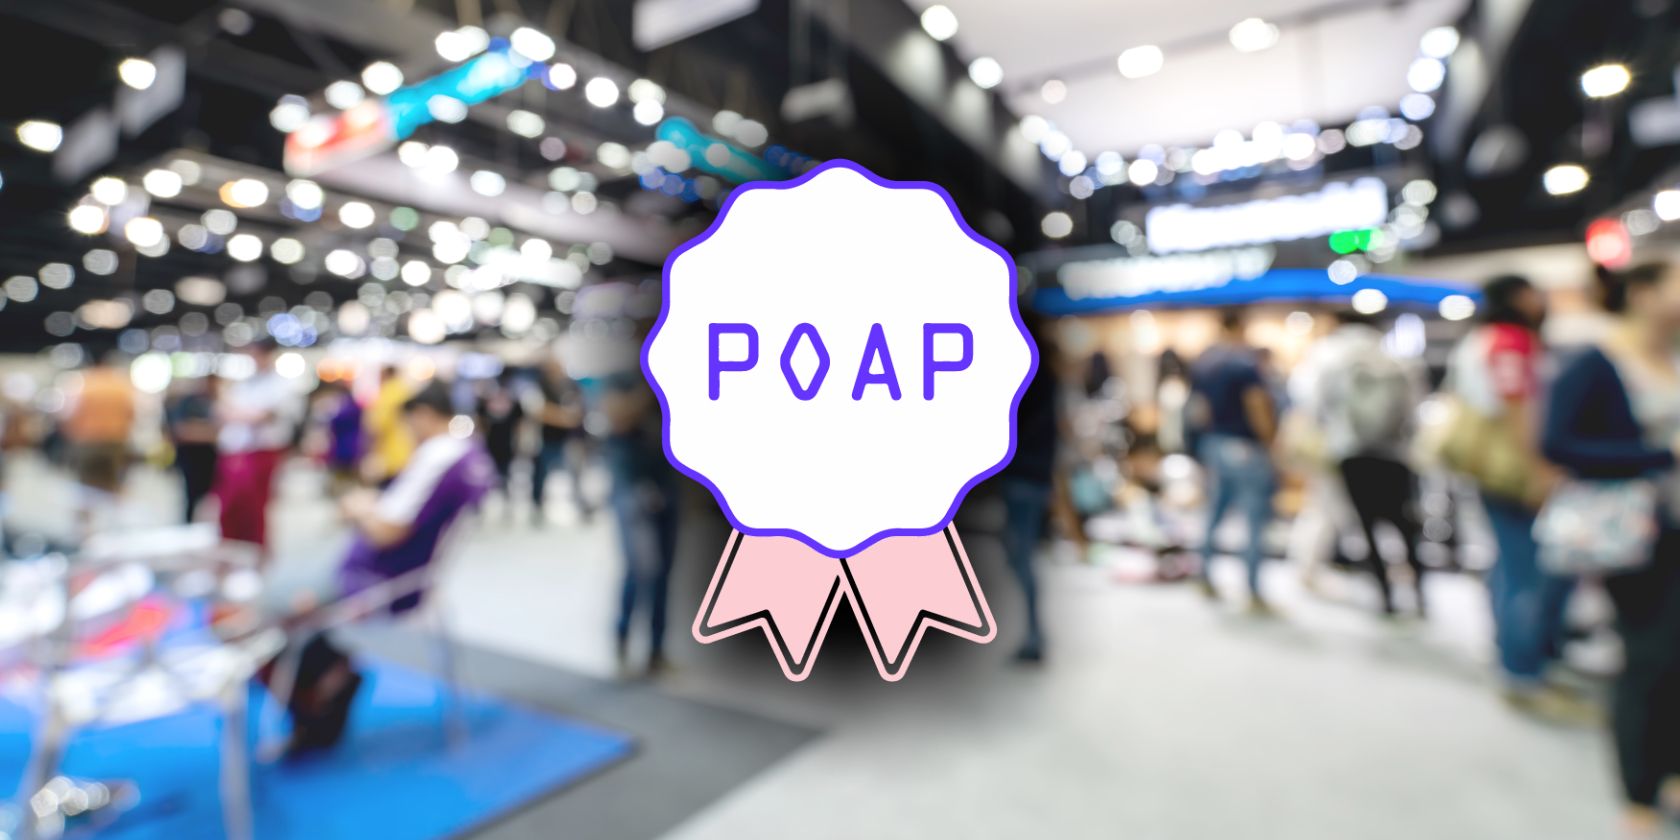 poap logo on conference background